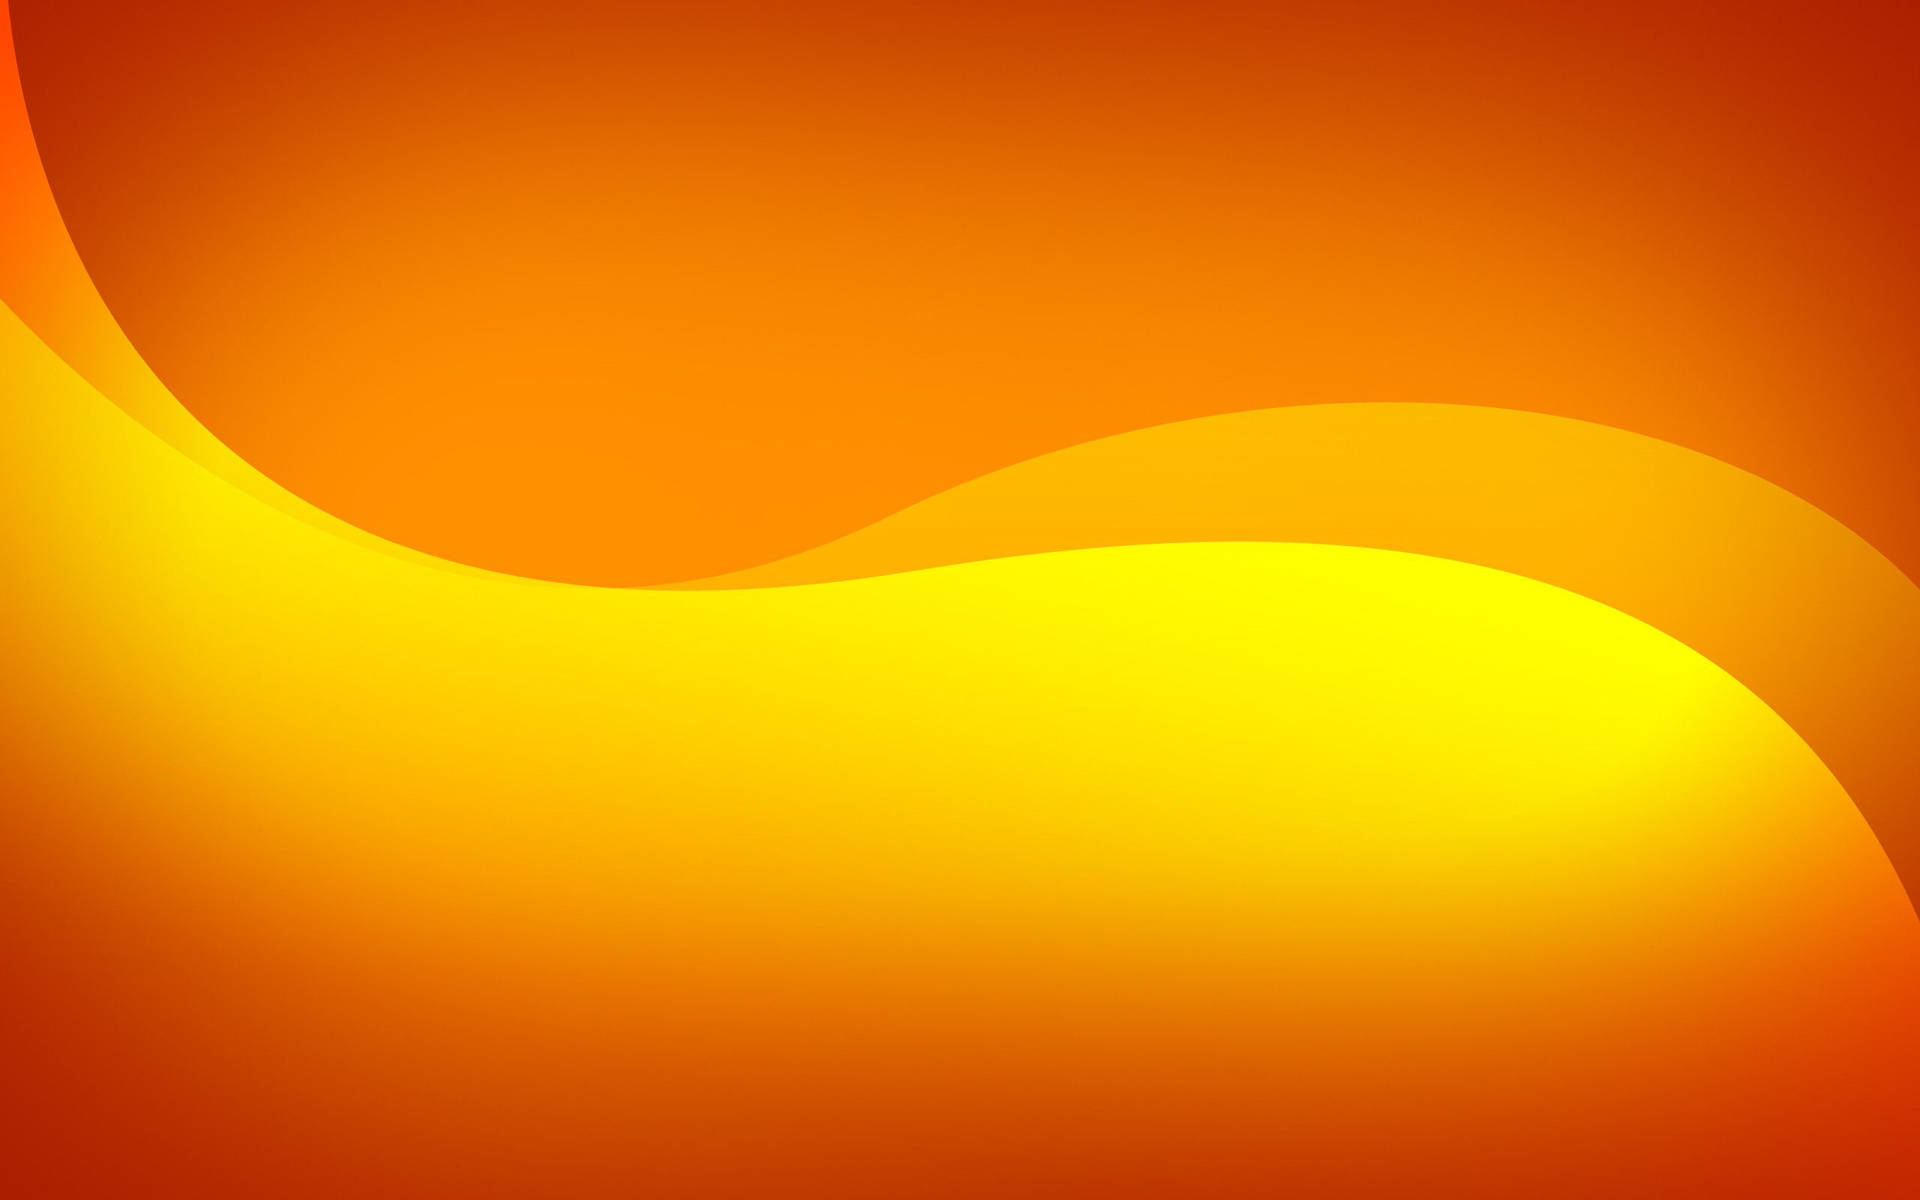 A tranquil orange wavelength art with a yellow hue Wallpaper